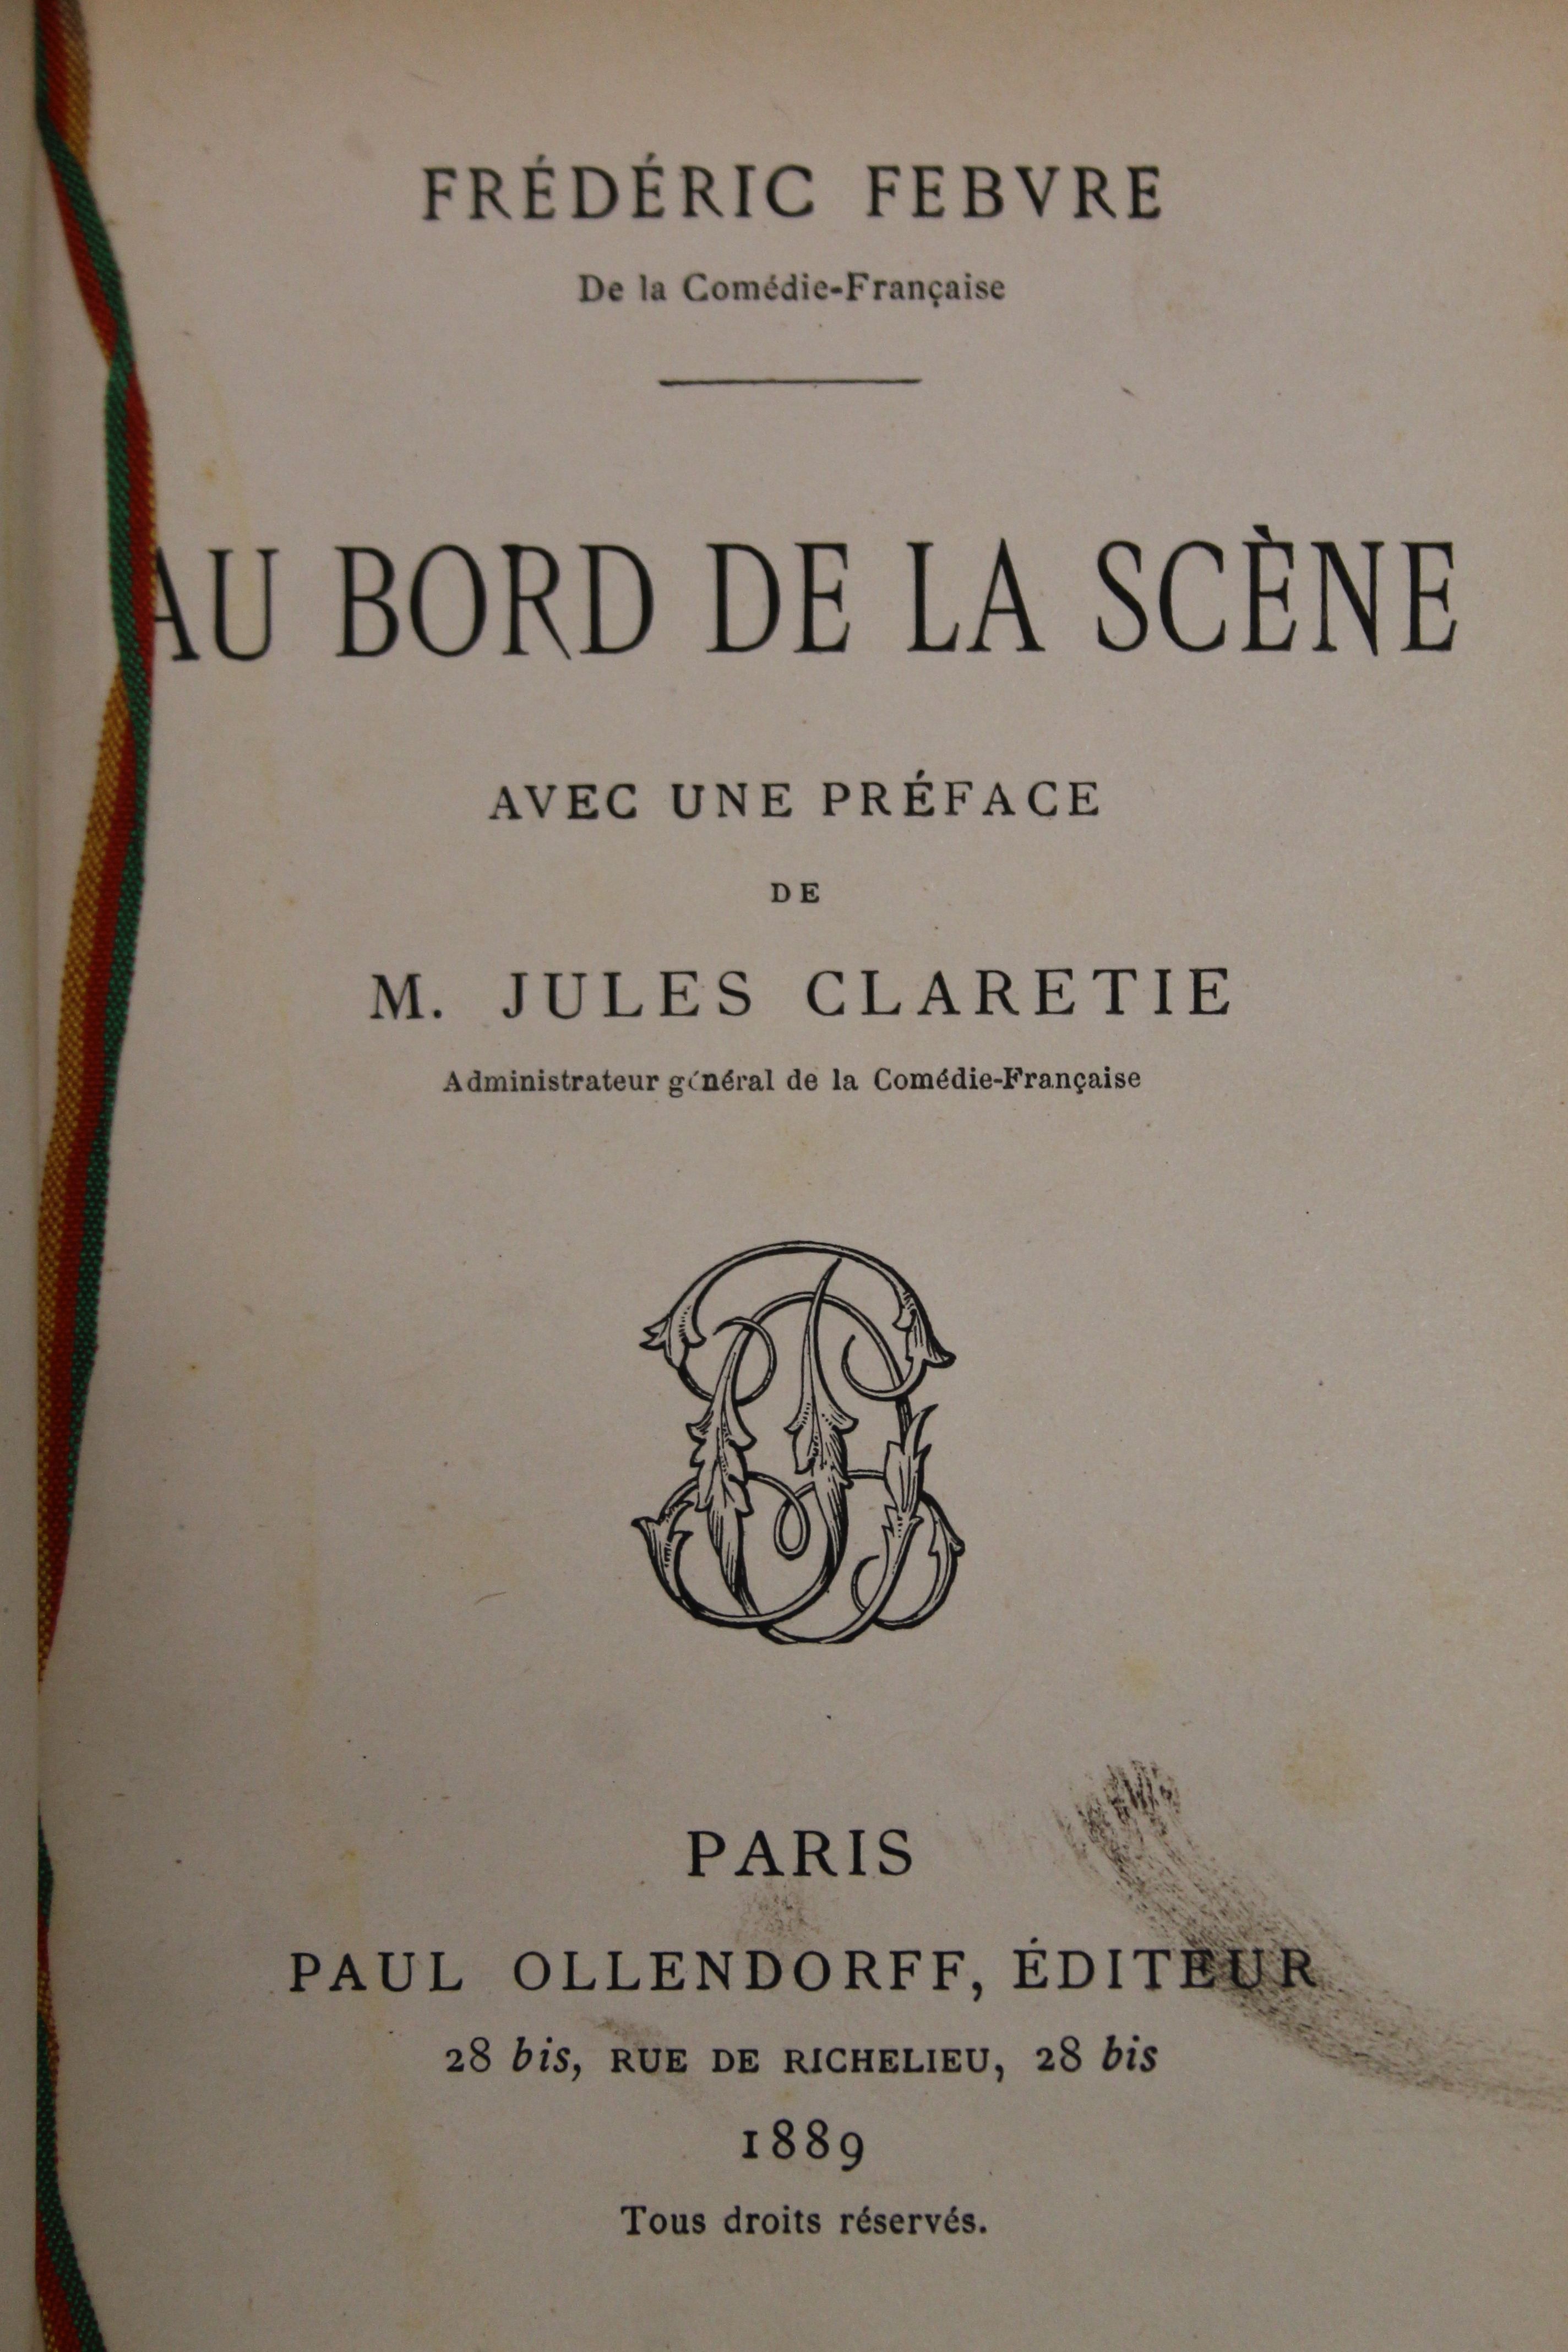 Dornis (Jean), La Voie Douloureuse, first edition, authors full book, signed presentation copy, - Image 10 of 34